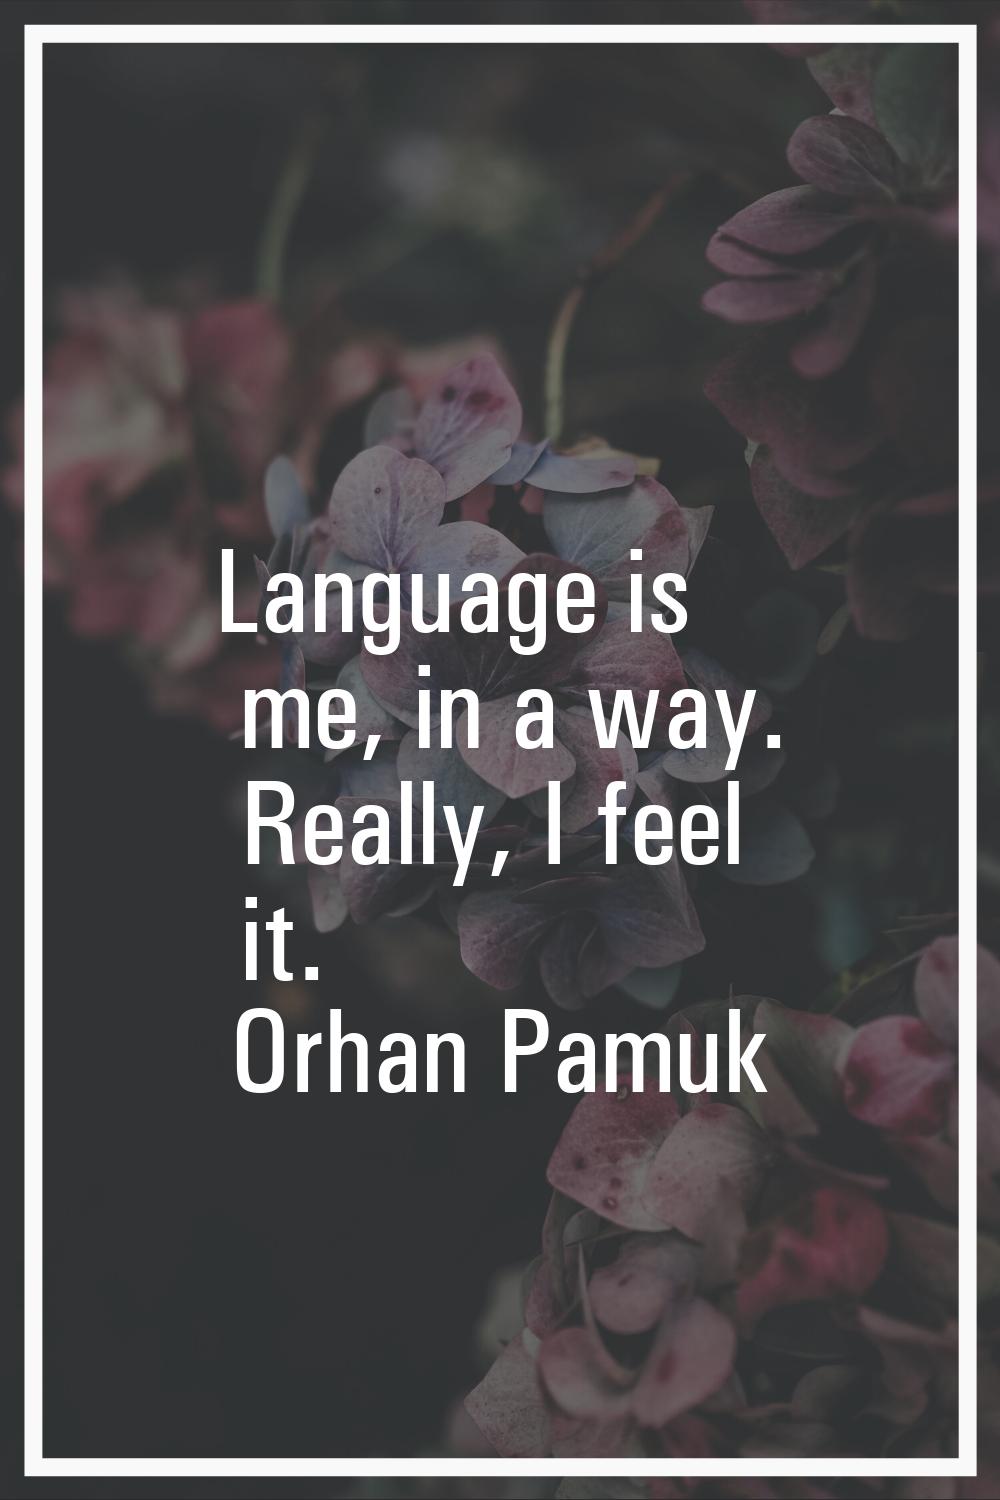 Language is me, in a way. Really, I feel it.